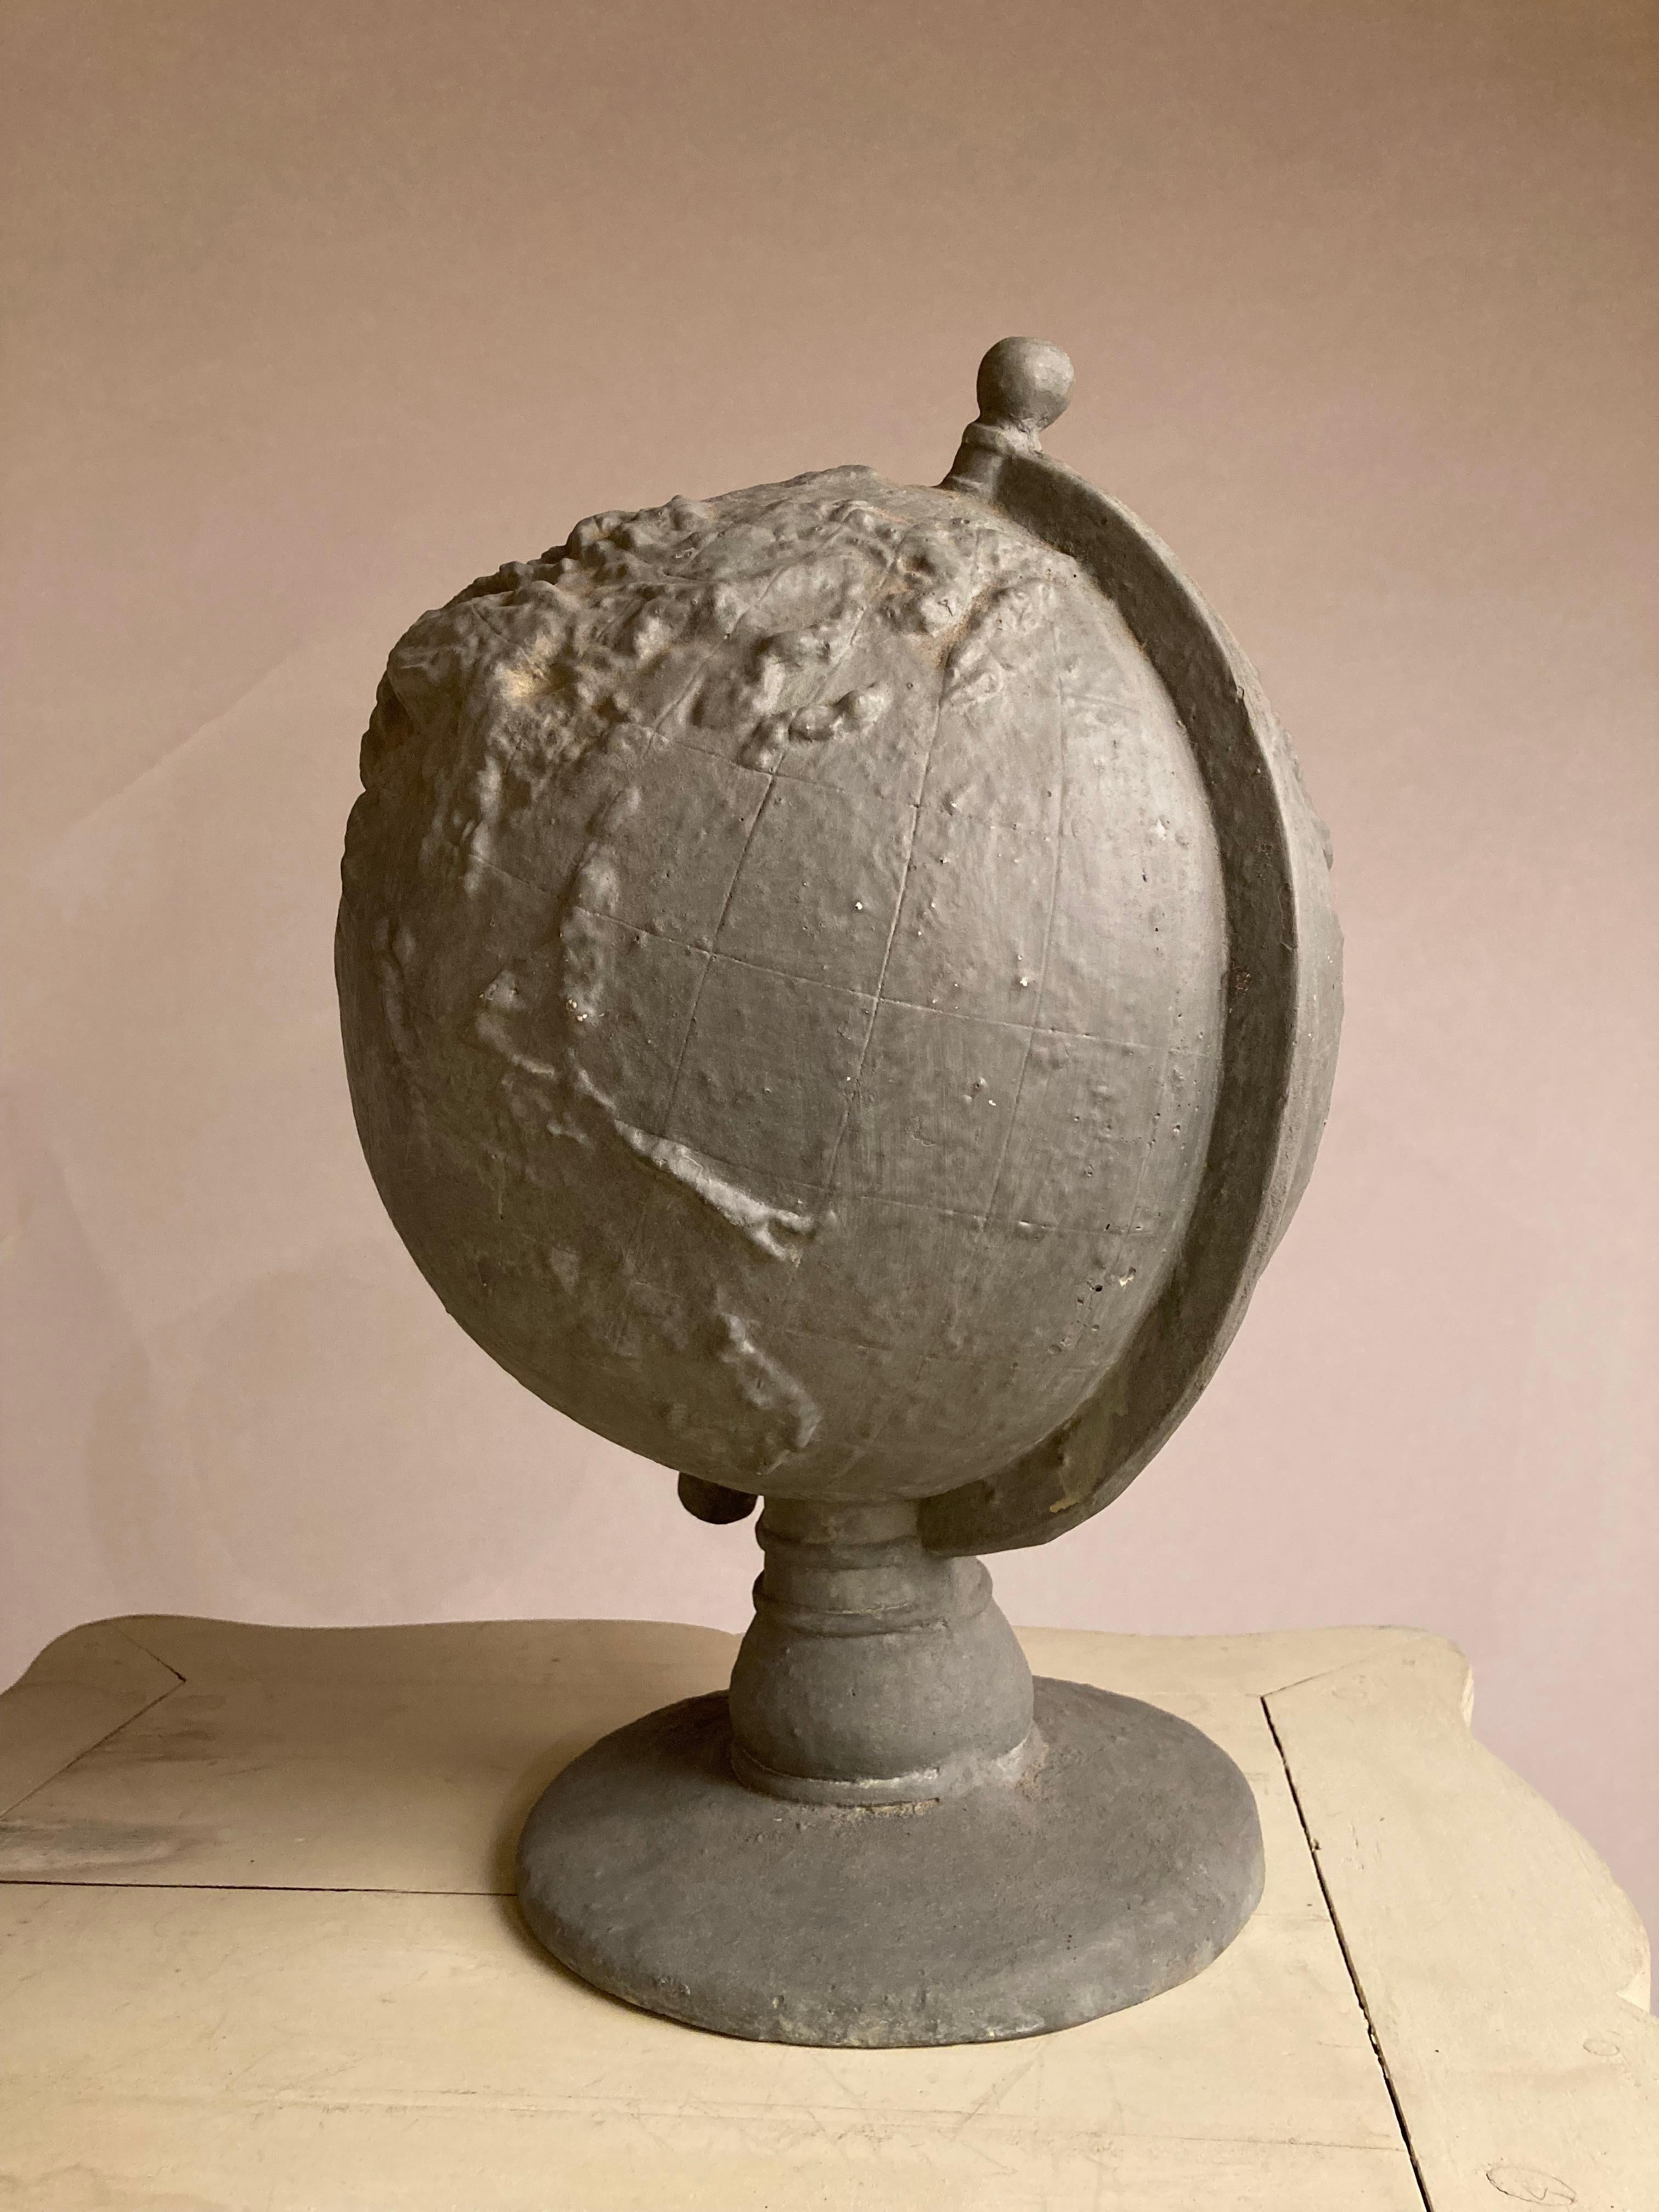 Very cool gray painted plaster topographical globe on stand of the planet earth, showing prominently the various mountain ranges, Andes, Rockies, Himalayas etc. Unusual piece, style of Serge Roche. 
Measures: 19 inches high 13 diameter.